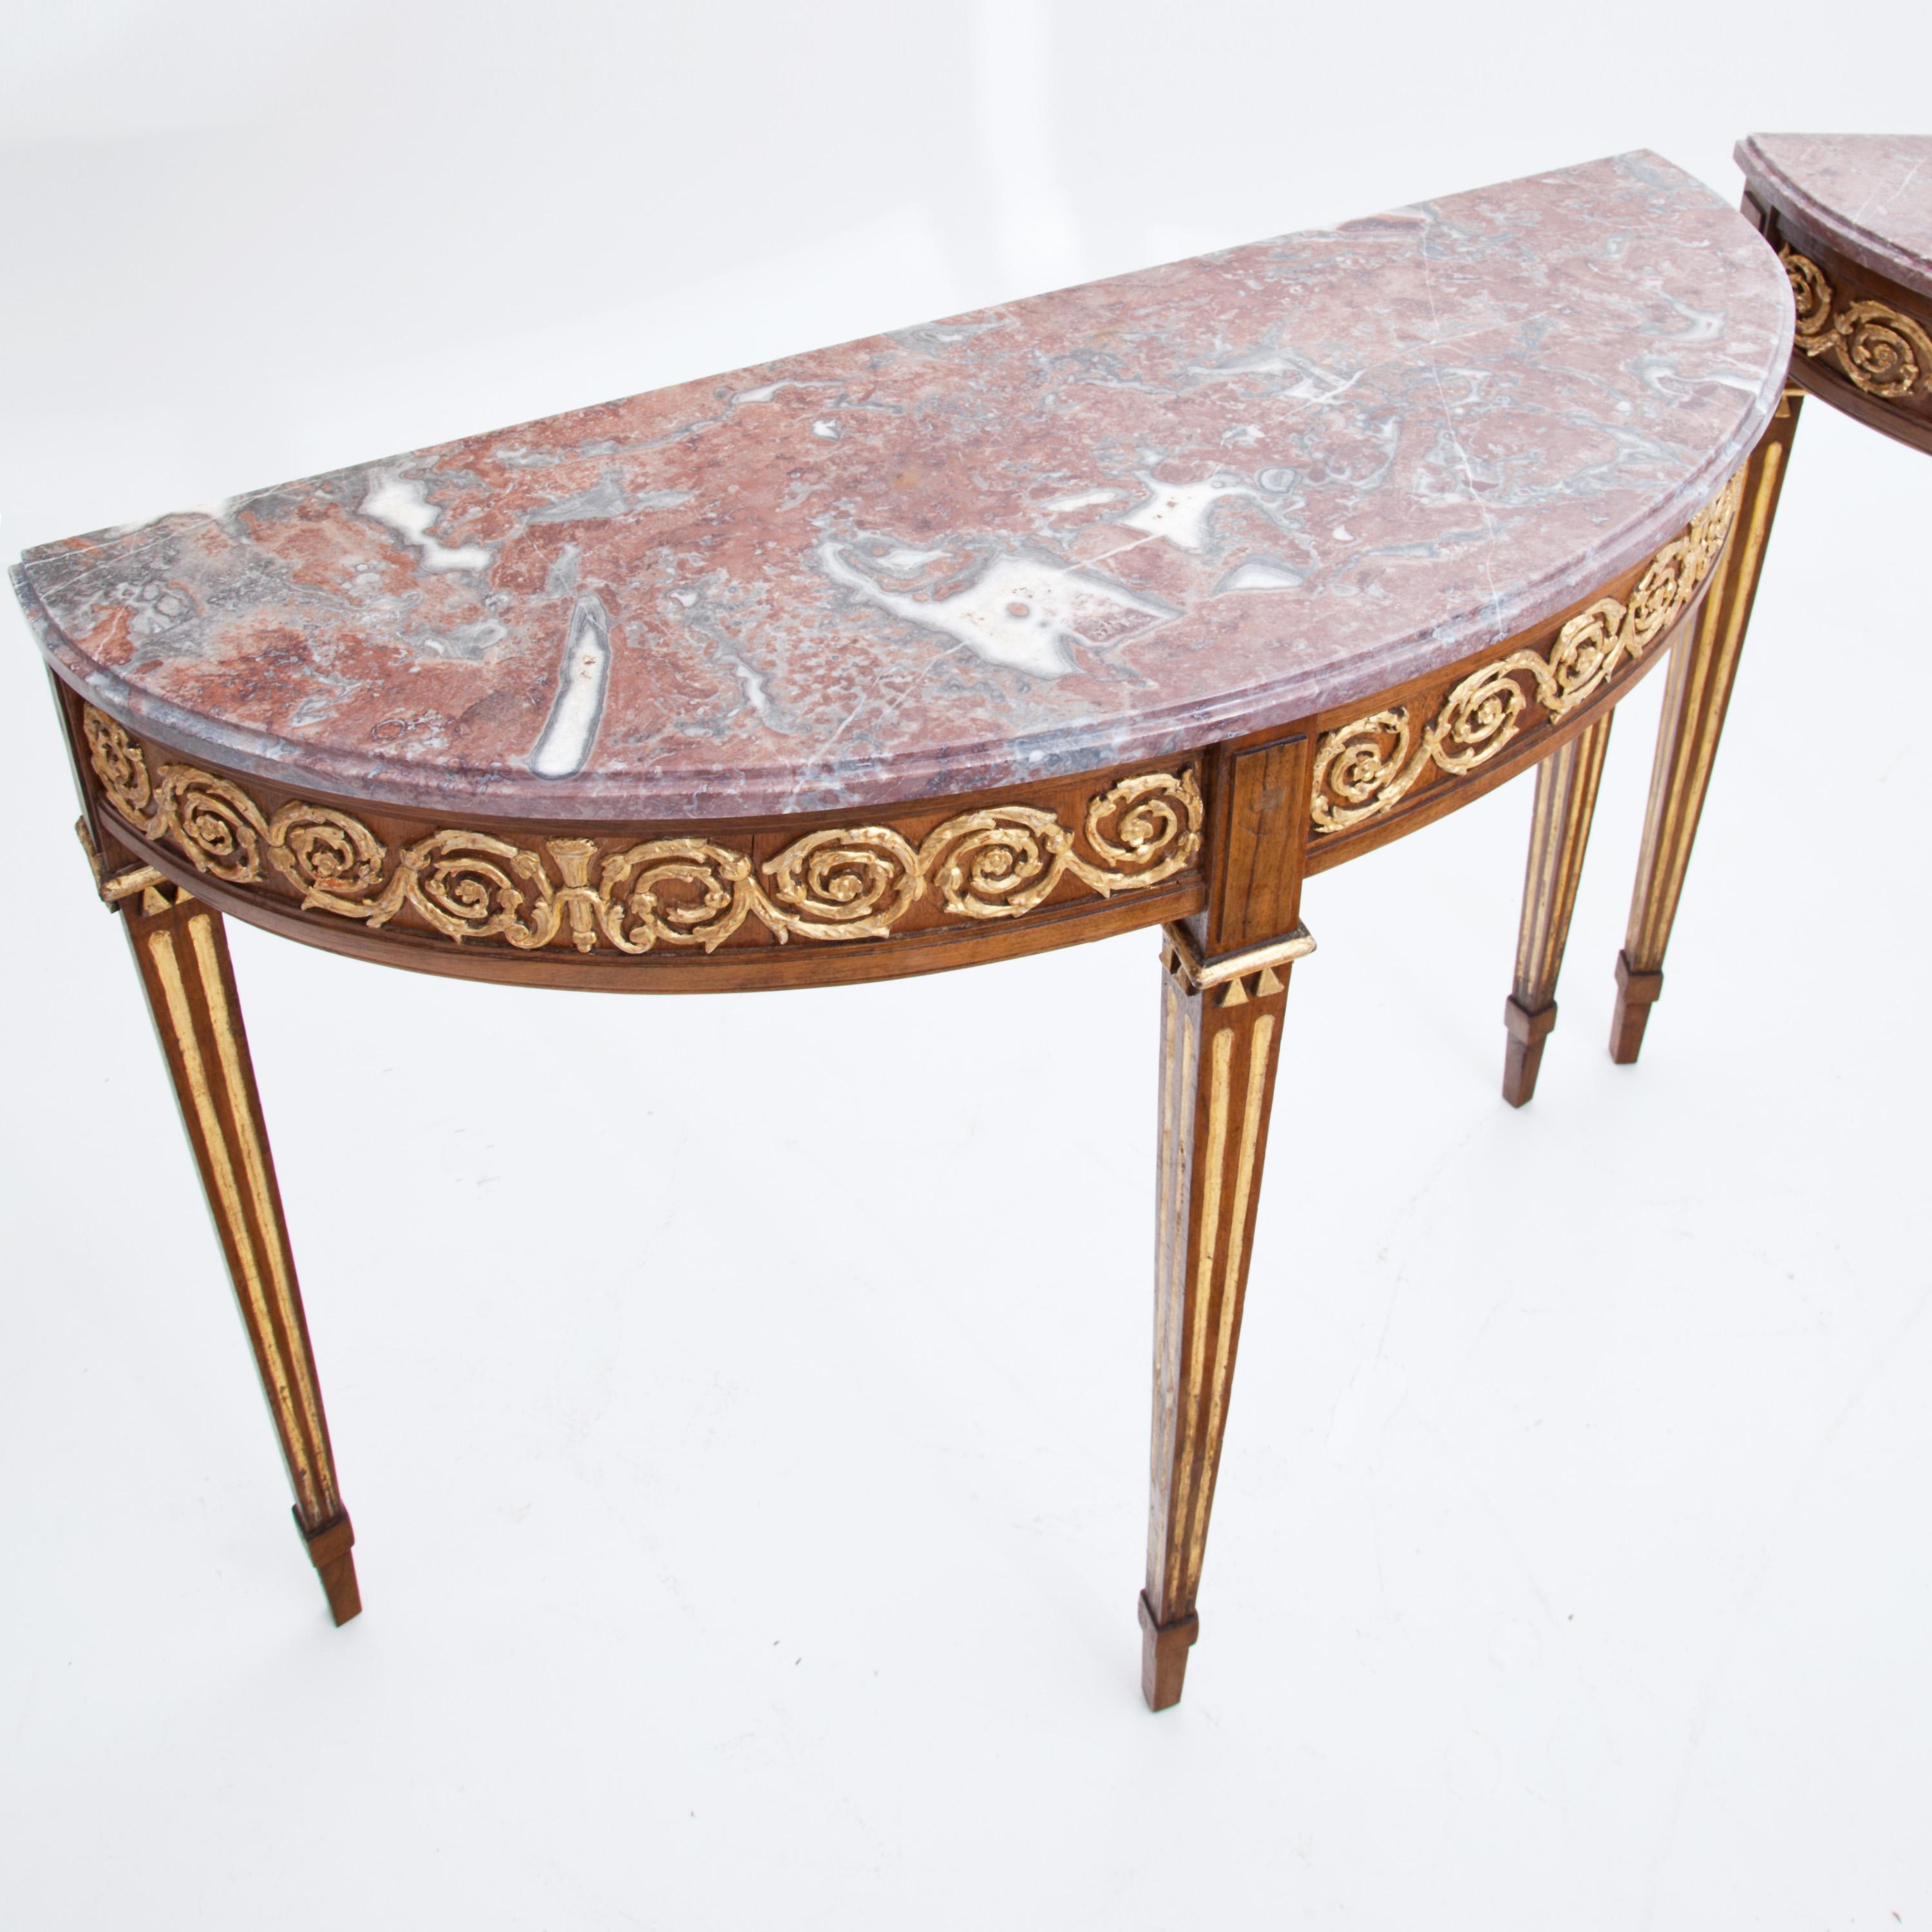 Pair of Redesigned 18th Century Demilune Consoles with Marble Tops 21st Century 3